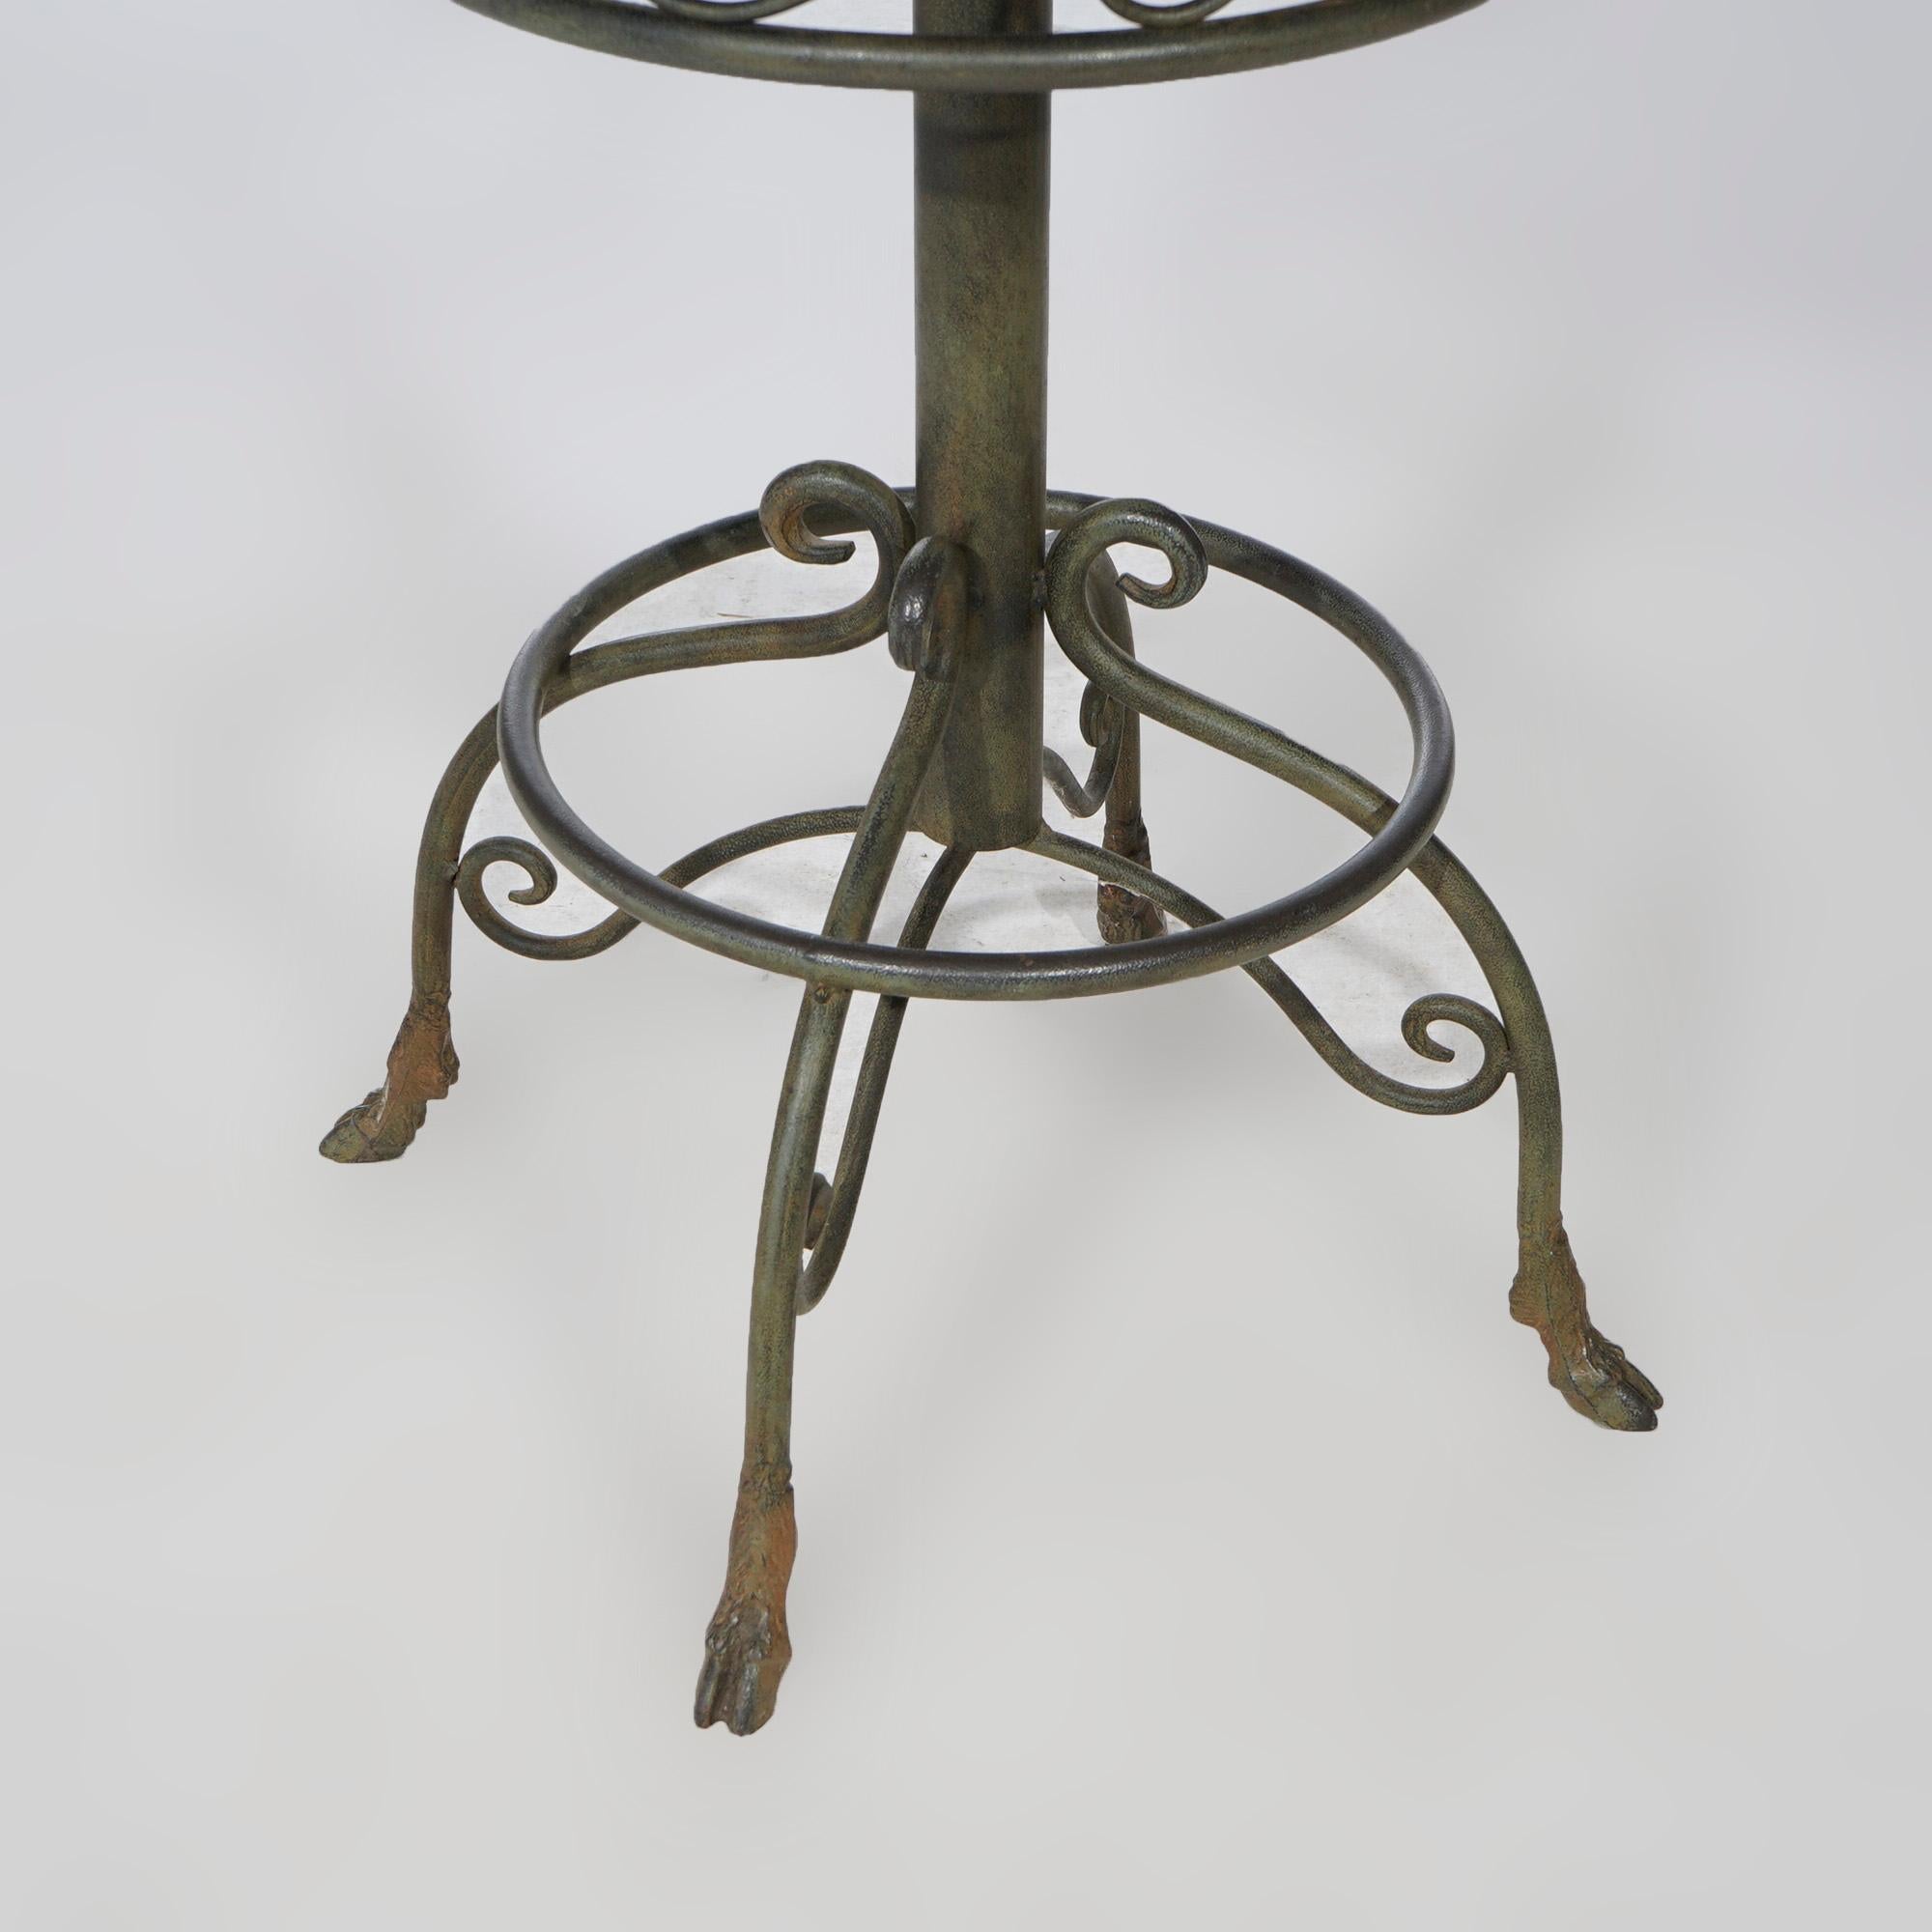 20th Century Figural Wrought Iron & Slate Pub Table & Chairs with Satyr Heads & Hoof Feet